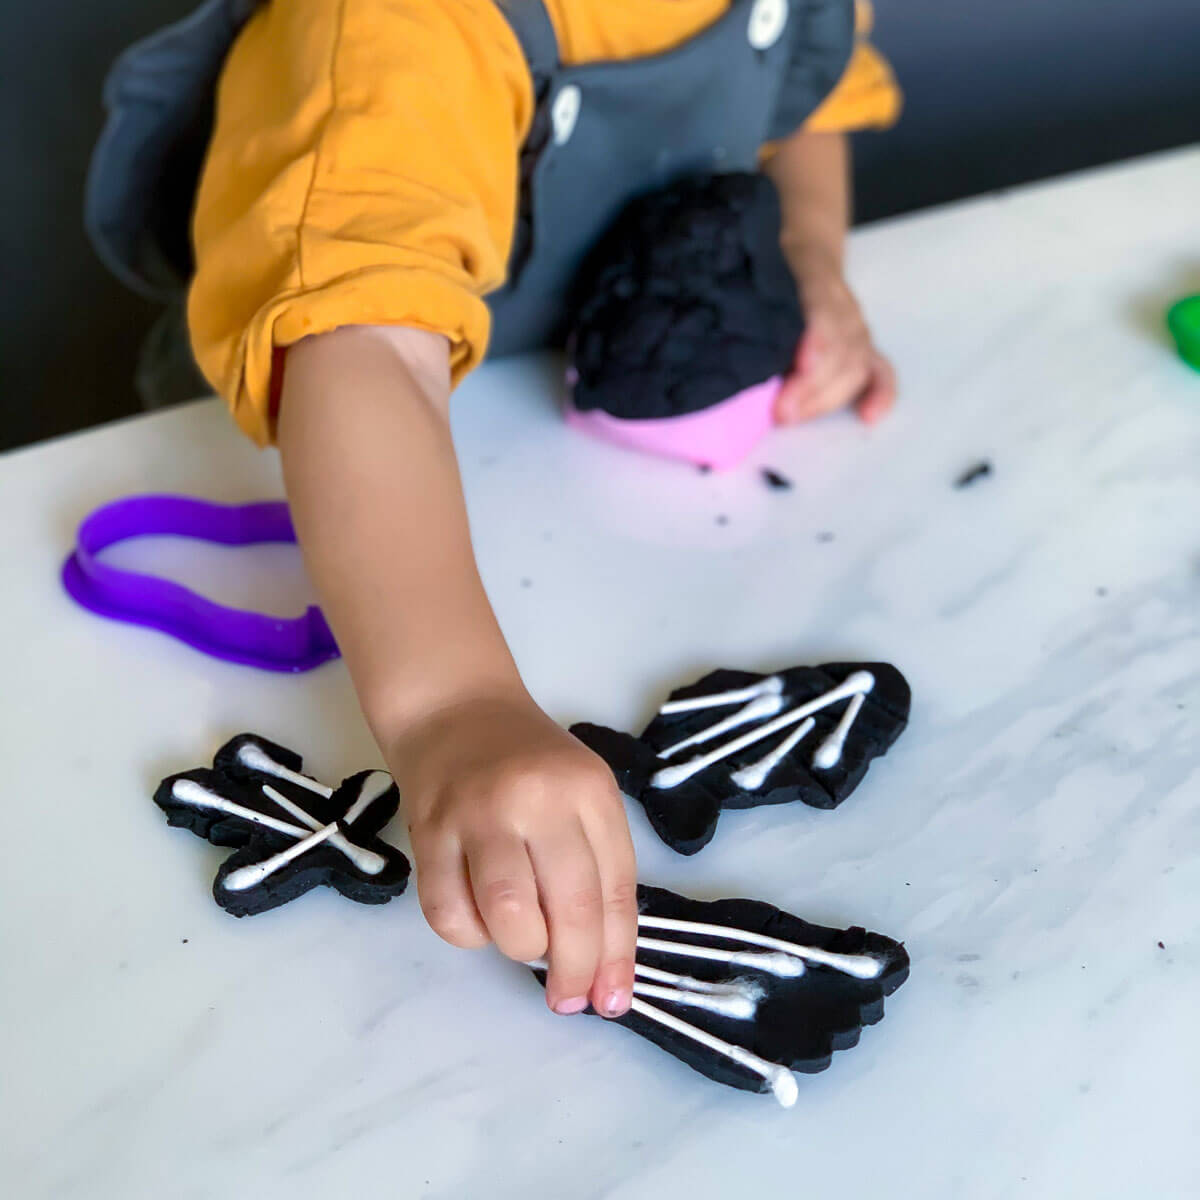 Q-Tip Skeleton Craft with Easy Play Dough Recipe